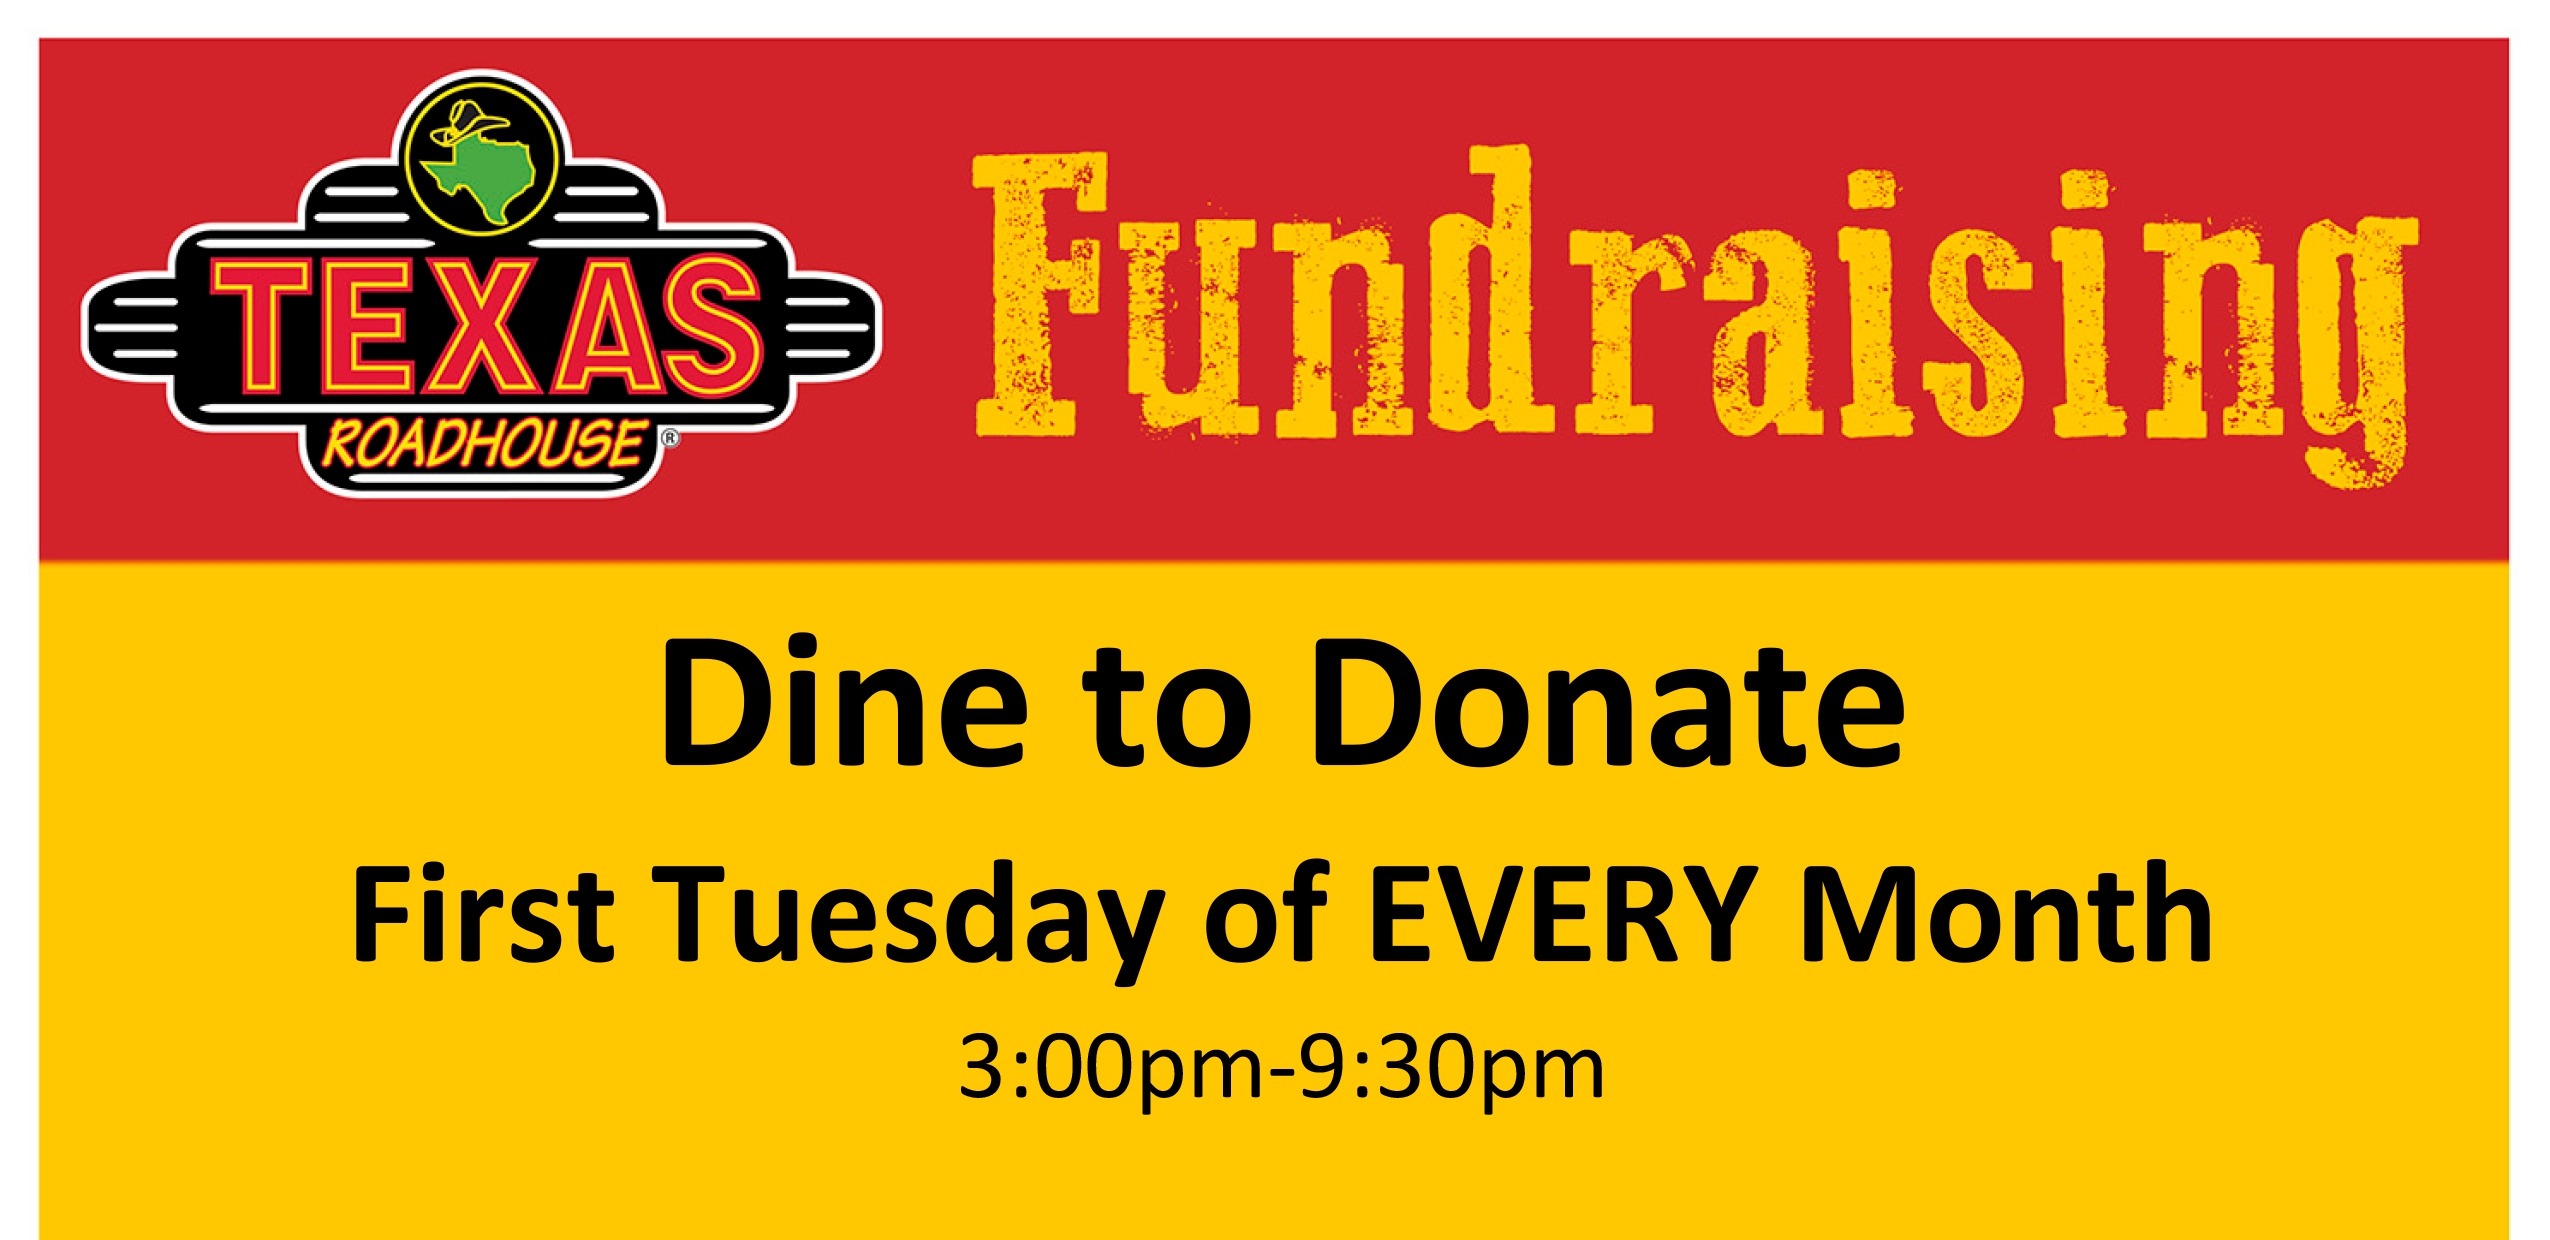 Dine to Donate at Texas Roadhouse